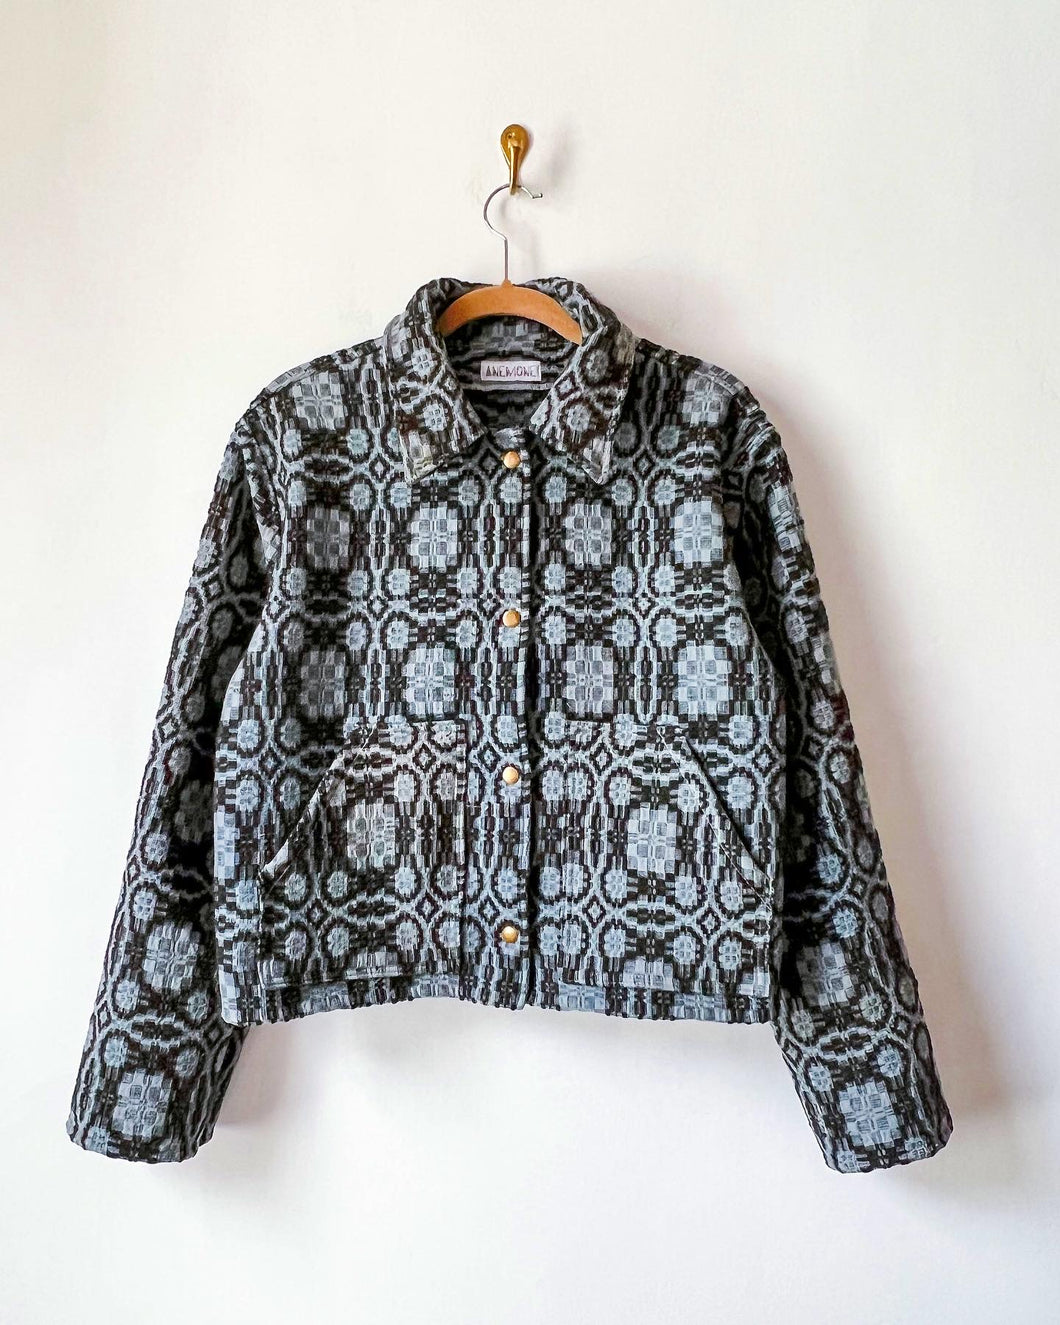 One-of-a-Kind: Overshot Coverlet Cropped Coat (black and blue)